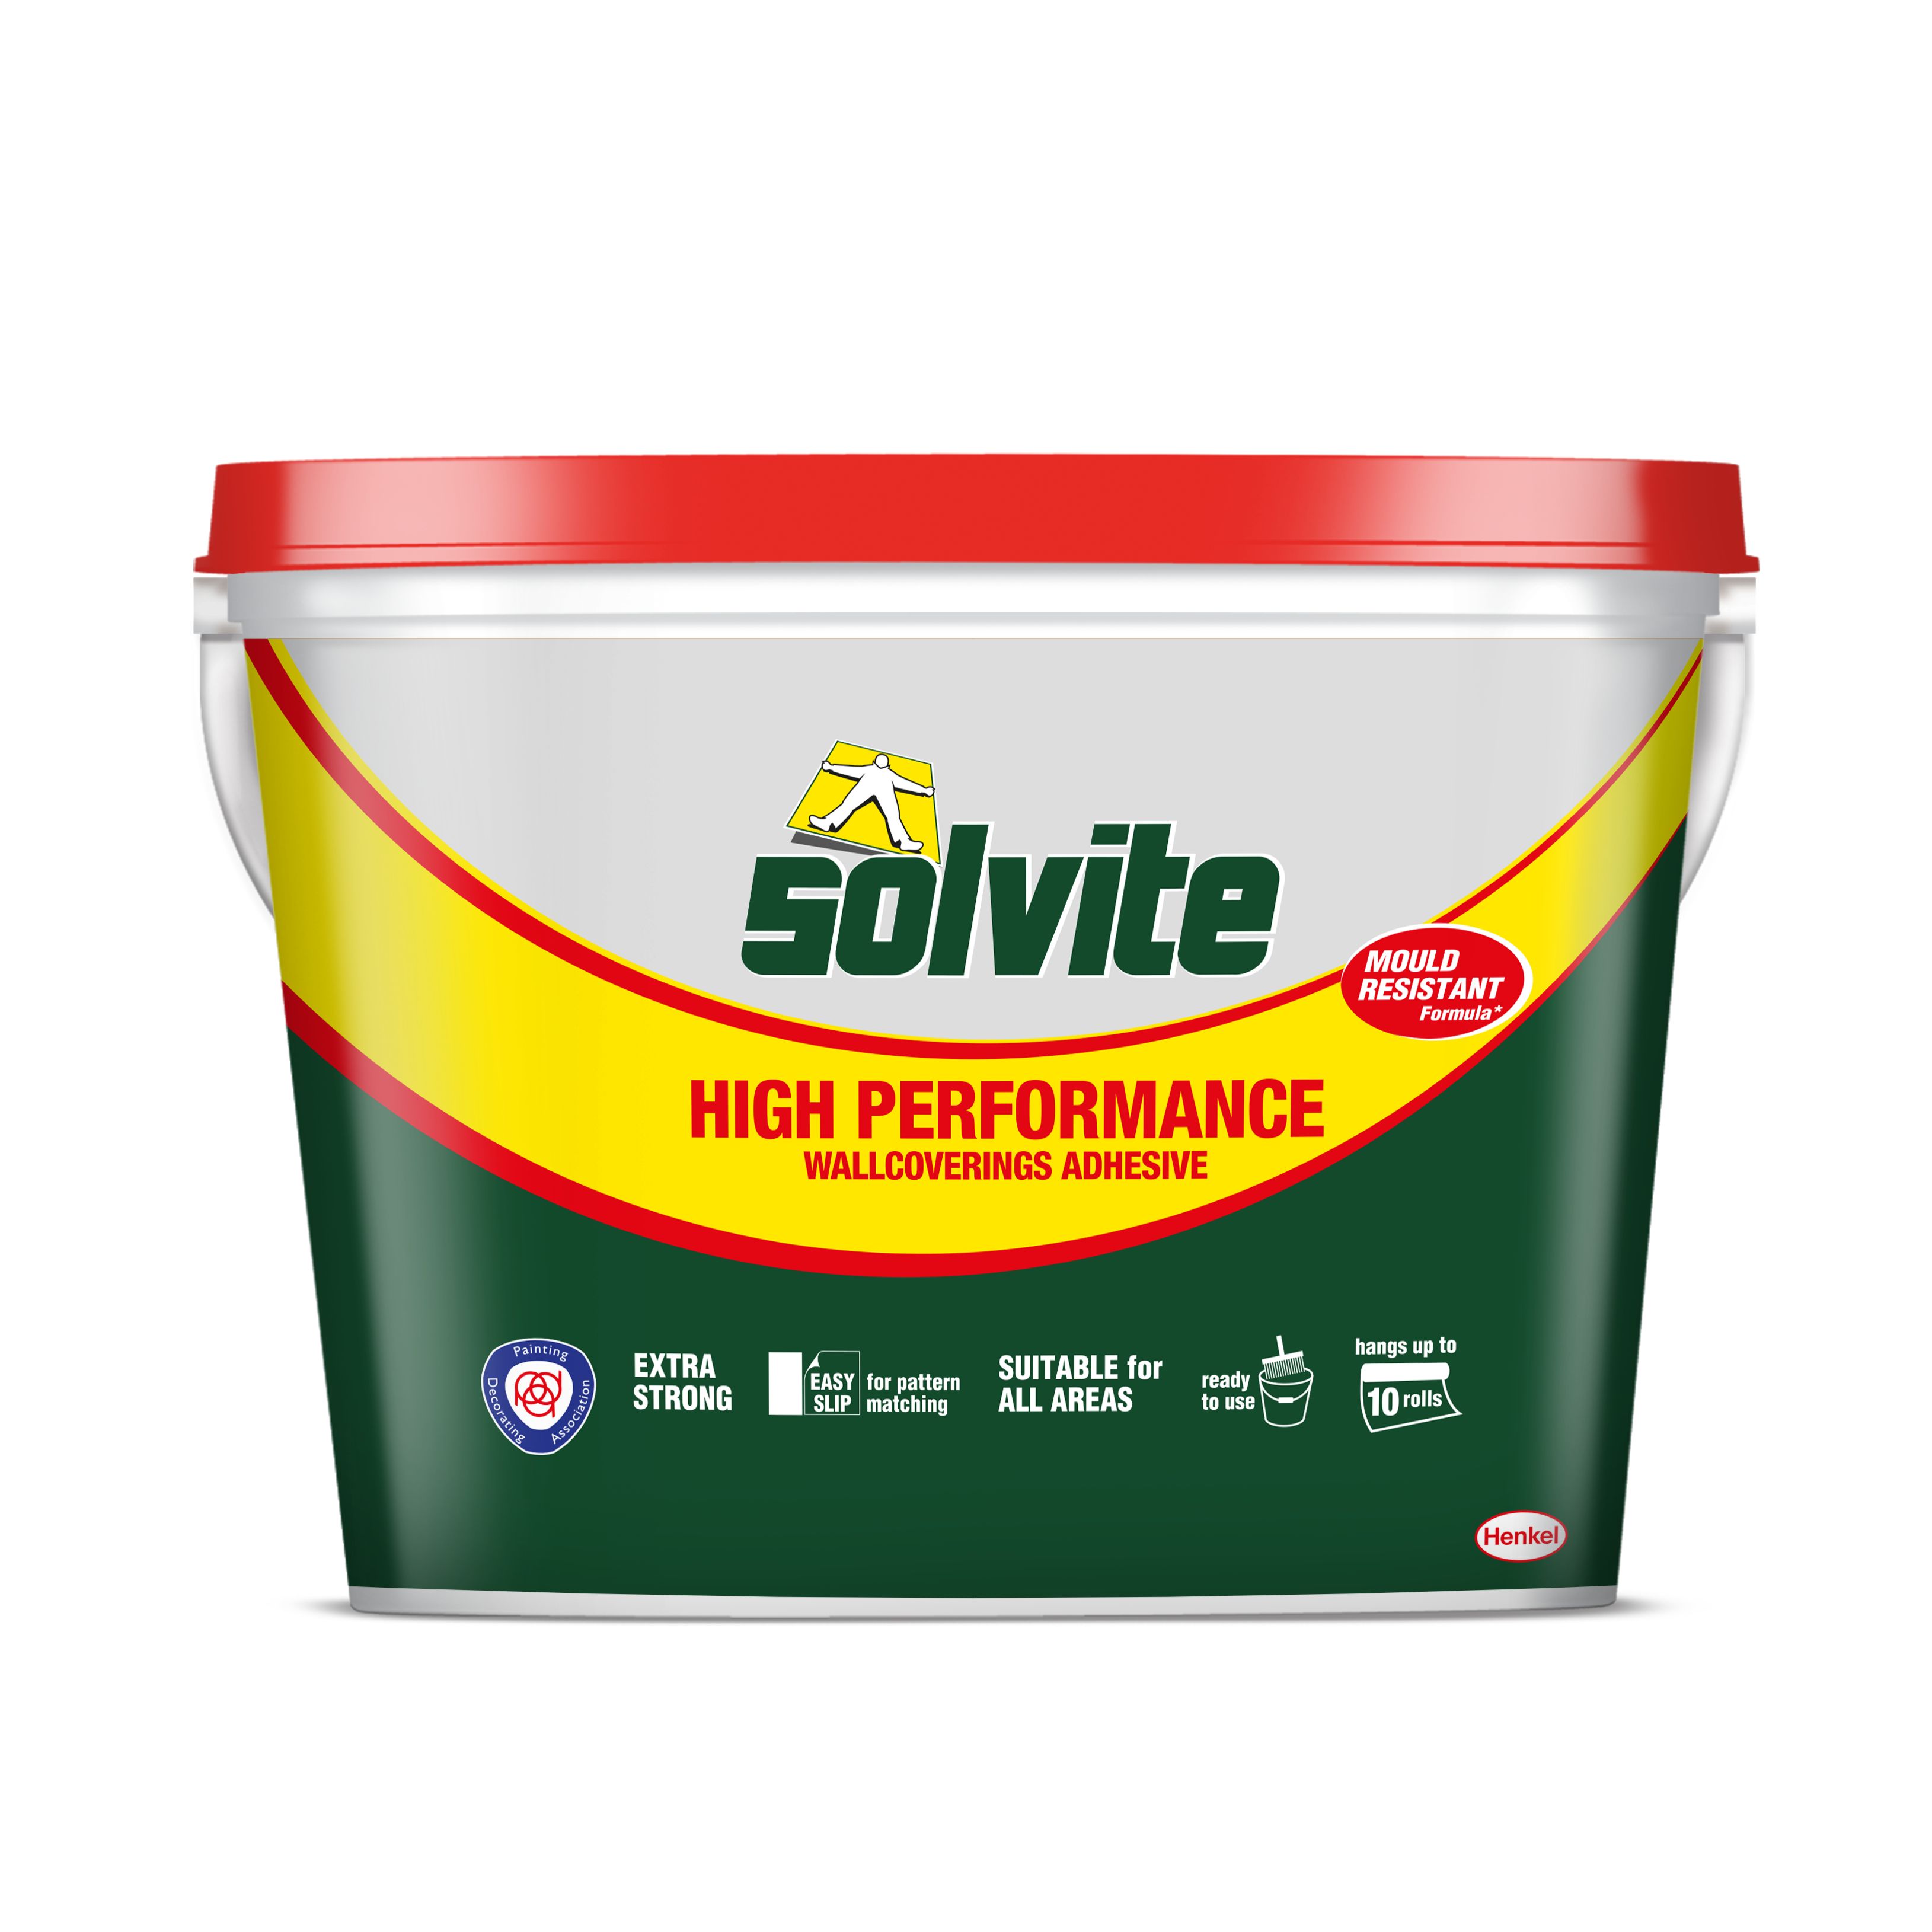 Solvite Ready mixed Wall covering Adhesive 10kg - 10 rolls